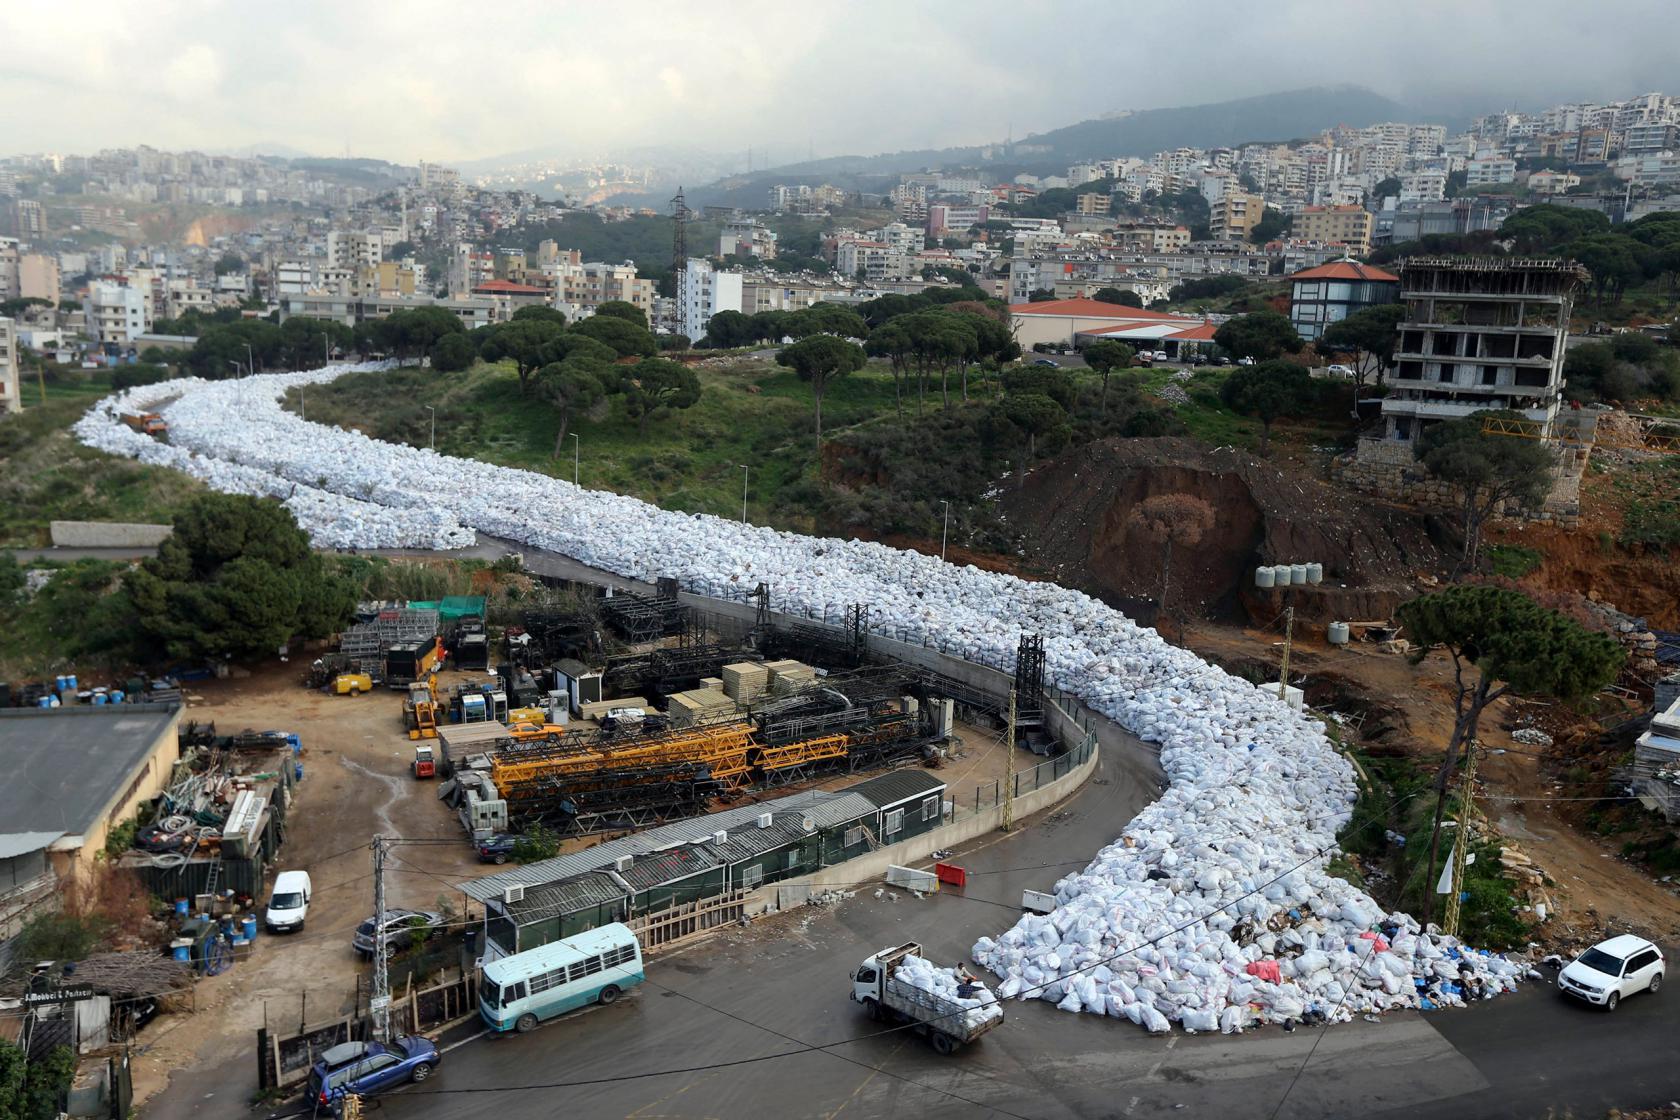 Thousands of packed garbage bags in Jdeideh, a northern suburb of Beirut, Lebanon, Feb. 23, 2016. The country has struggled to resolve its trash crisis since last summer. Hasan Shaaban—Reuters